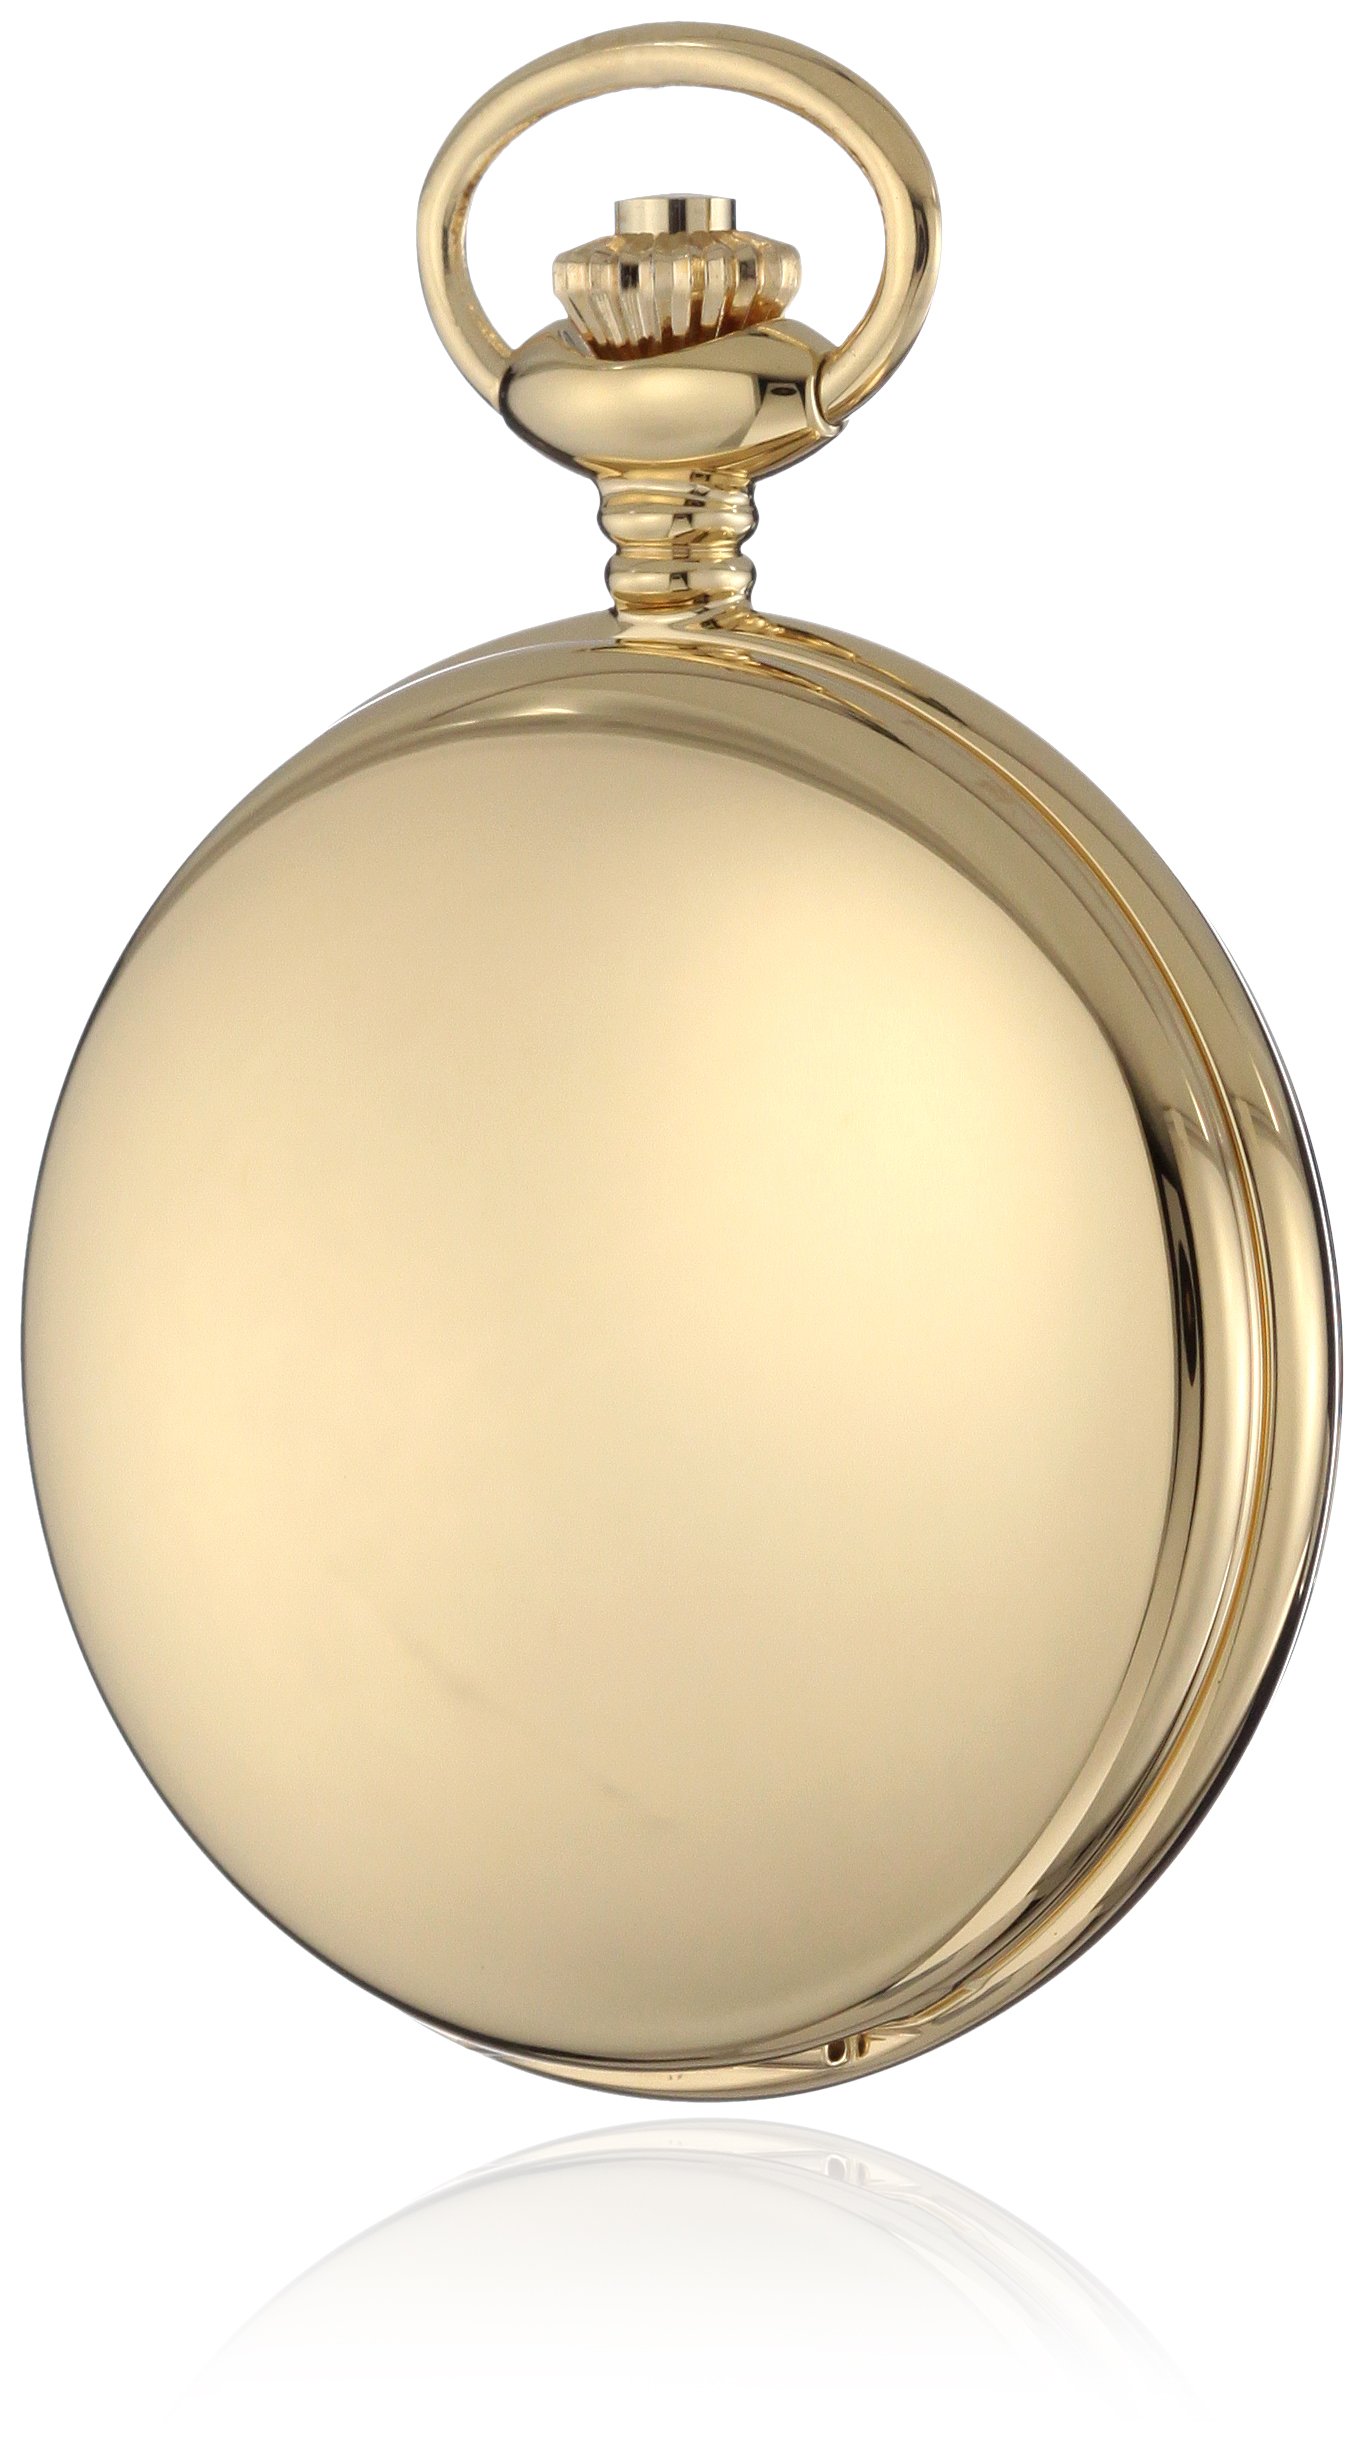 Charles-Hubert, Paris 3904-G Premium Collection Gold-Plated Stainless Steel Polished Finish Double Hunter Case Mechanical Pocket Watch